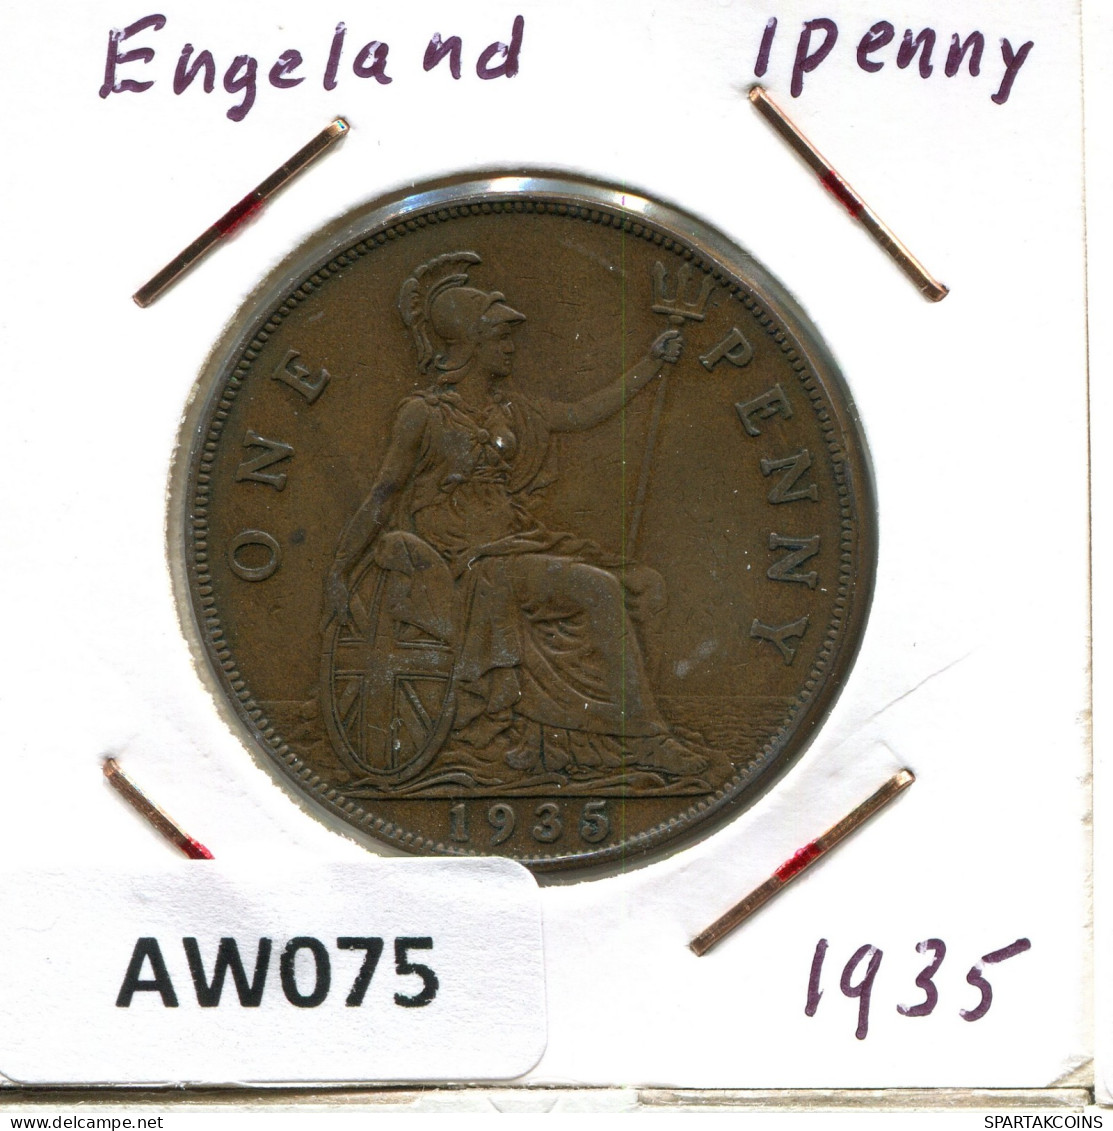 PENNY 1935 UK GREAT BRITAIN Coin #AW075.U.A - D. 1 Penny